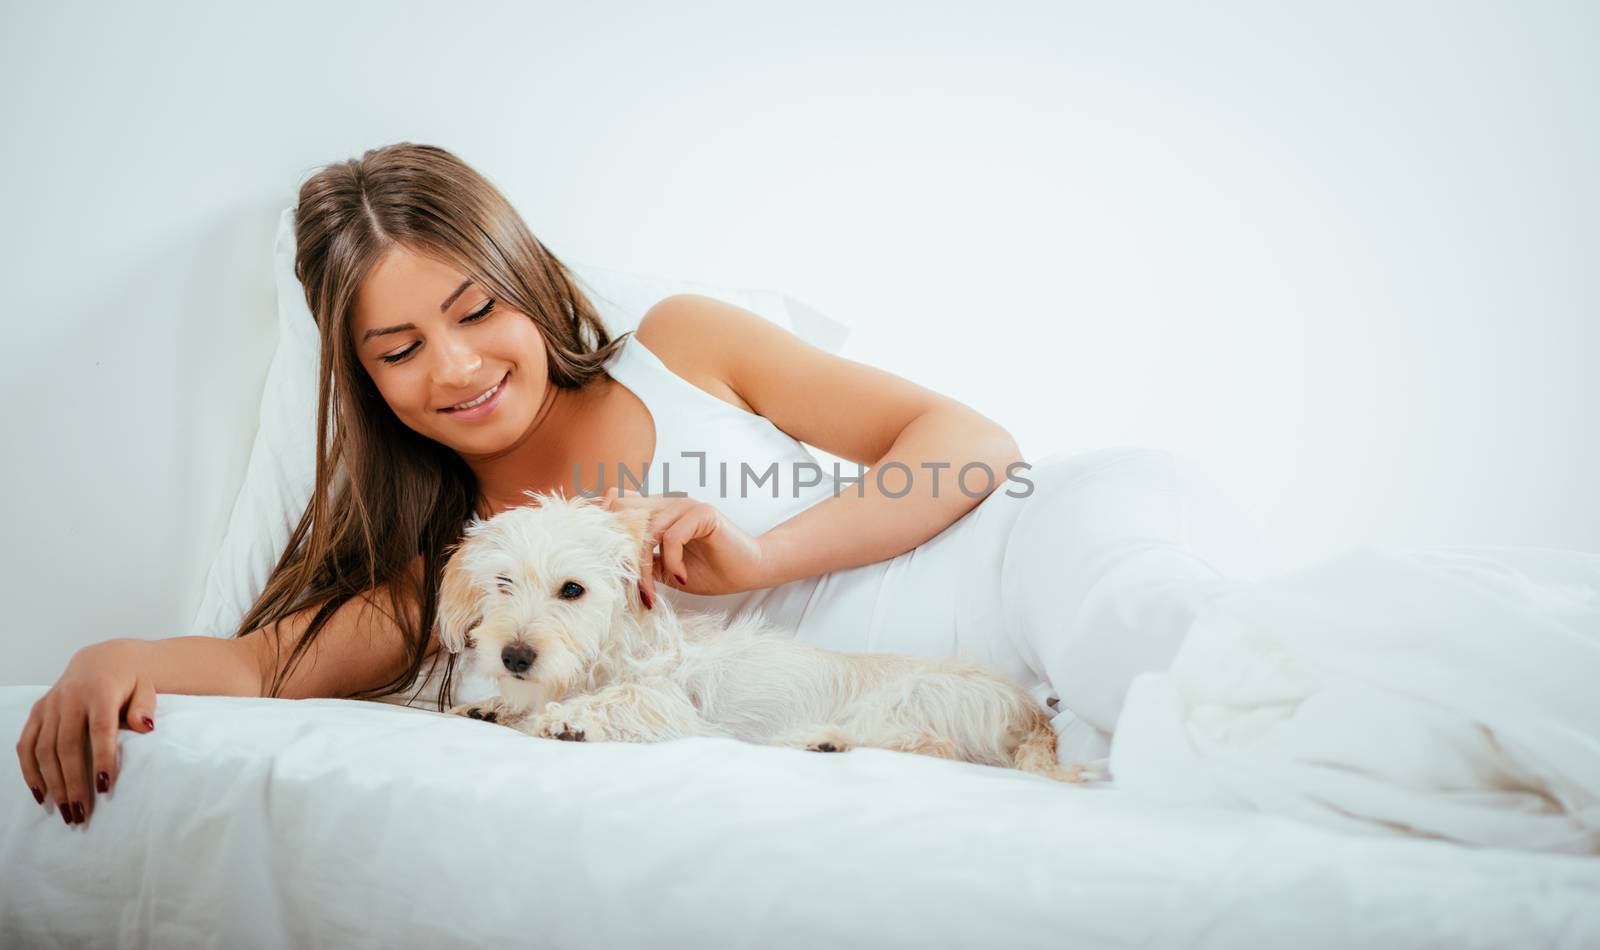 Girl And Dog In Bed by MilanMarkovic78